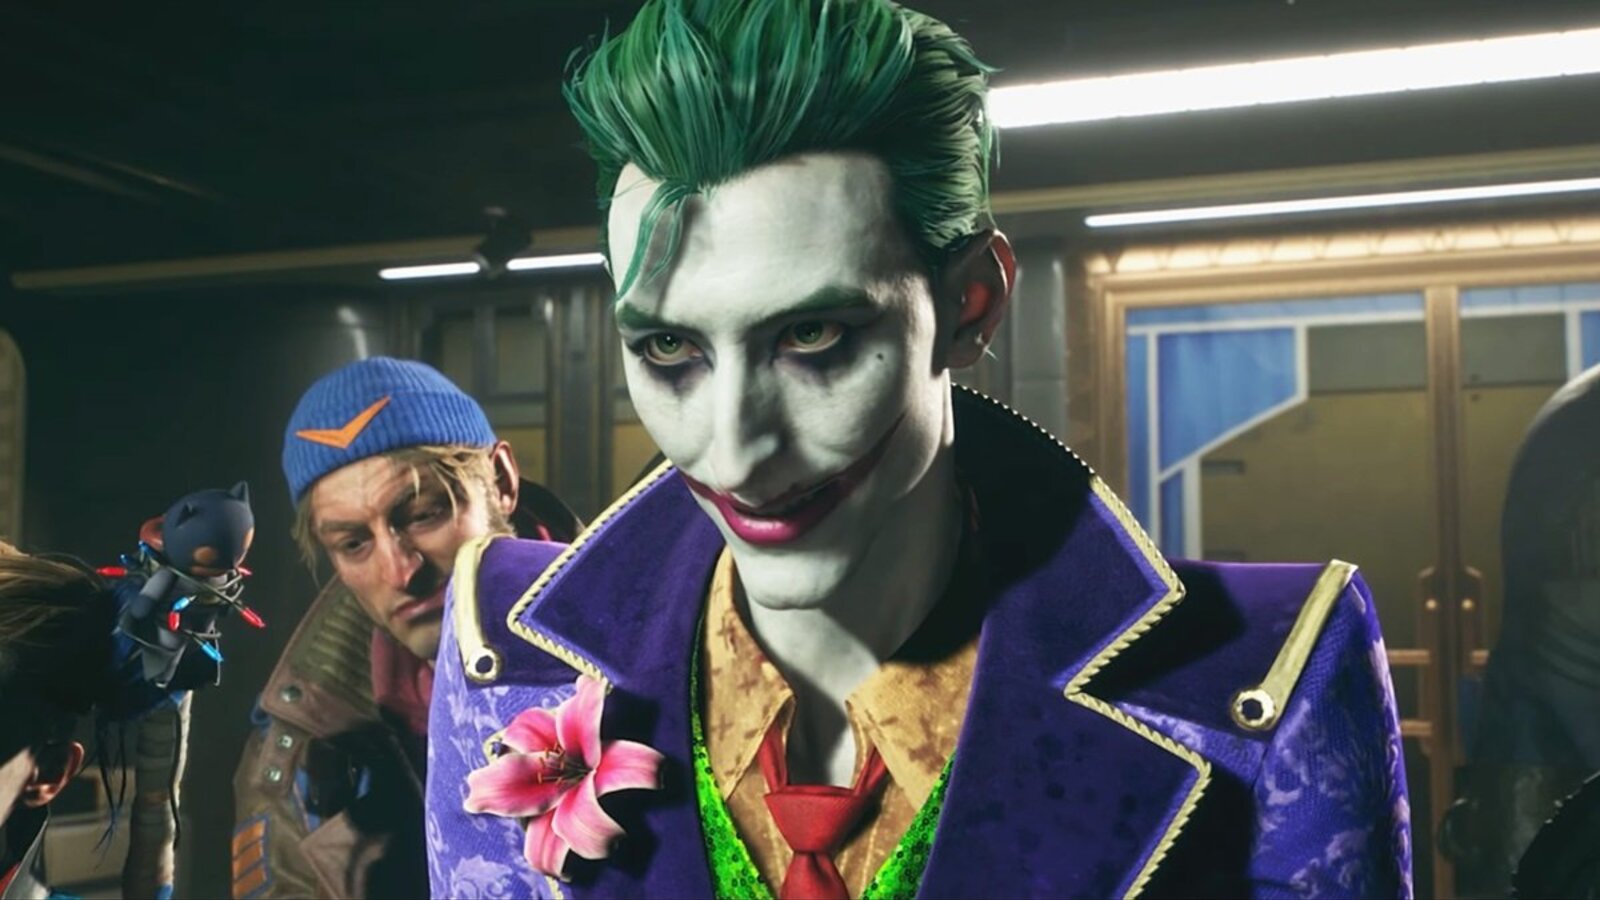 SUICIDE SQUAD: KILL THE JUSTICE LEAGUE Adds the Joker as a Playable ...